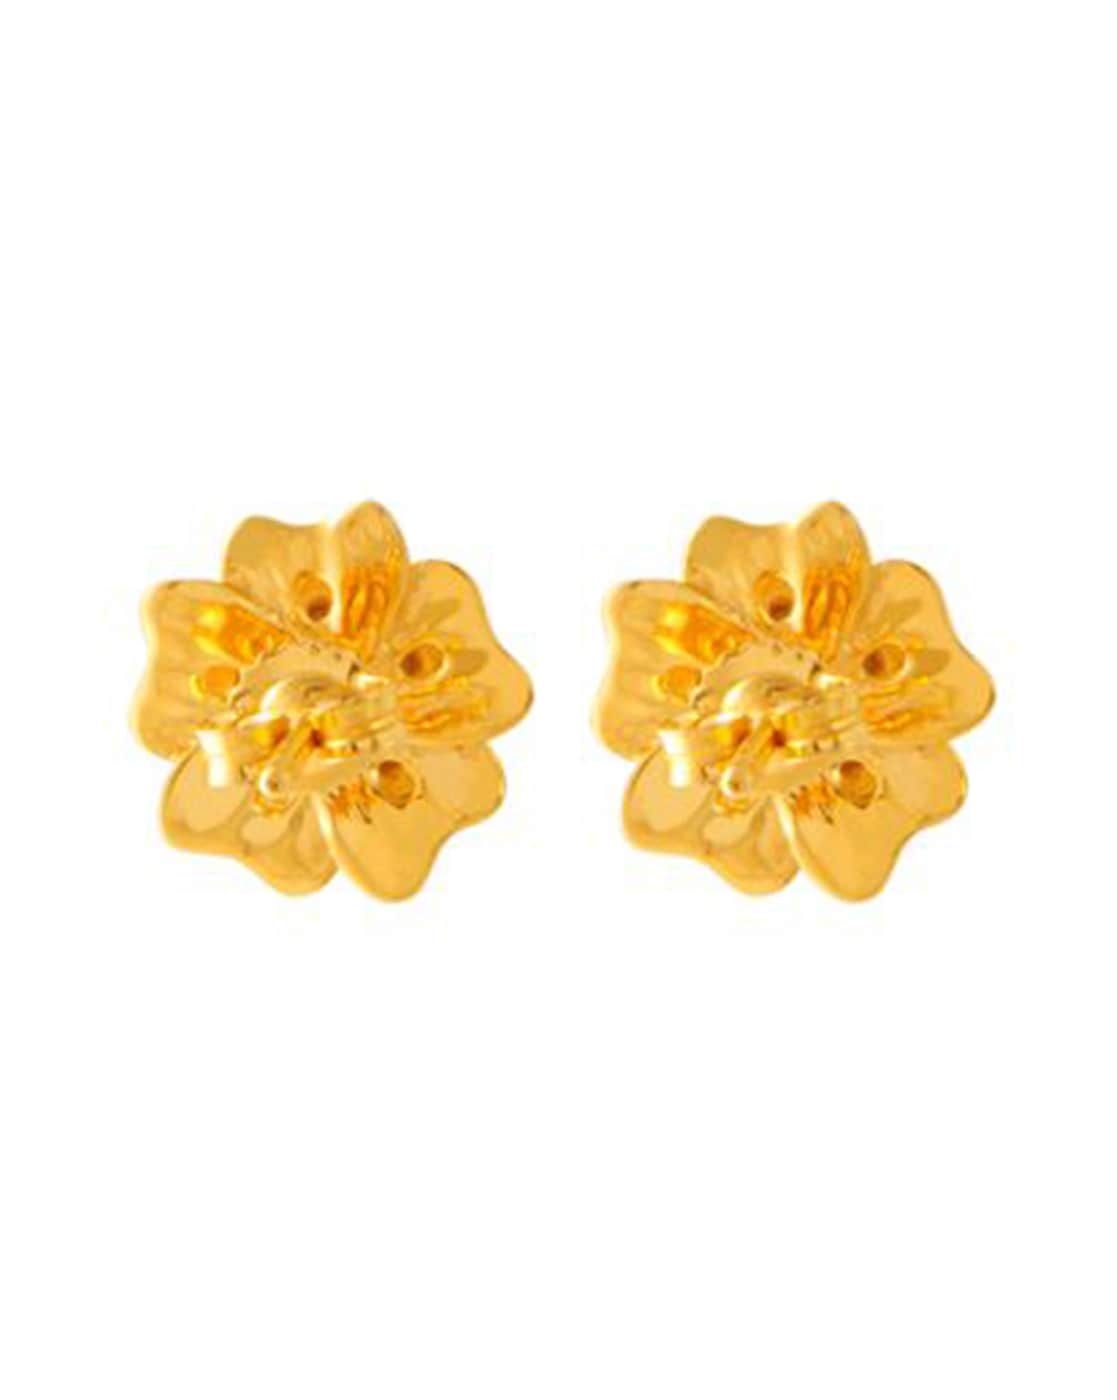 Discover 82+ earring 916 gold super hot